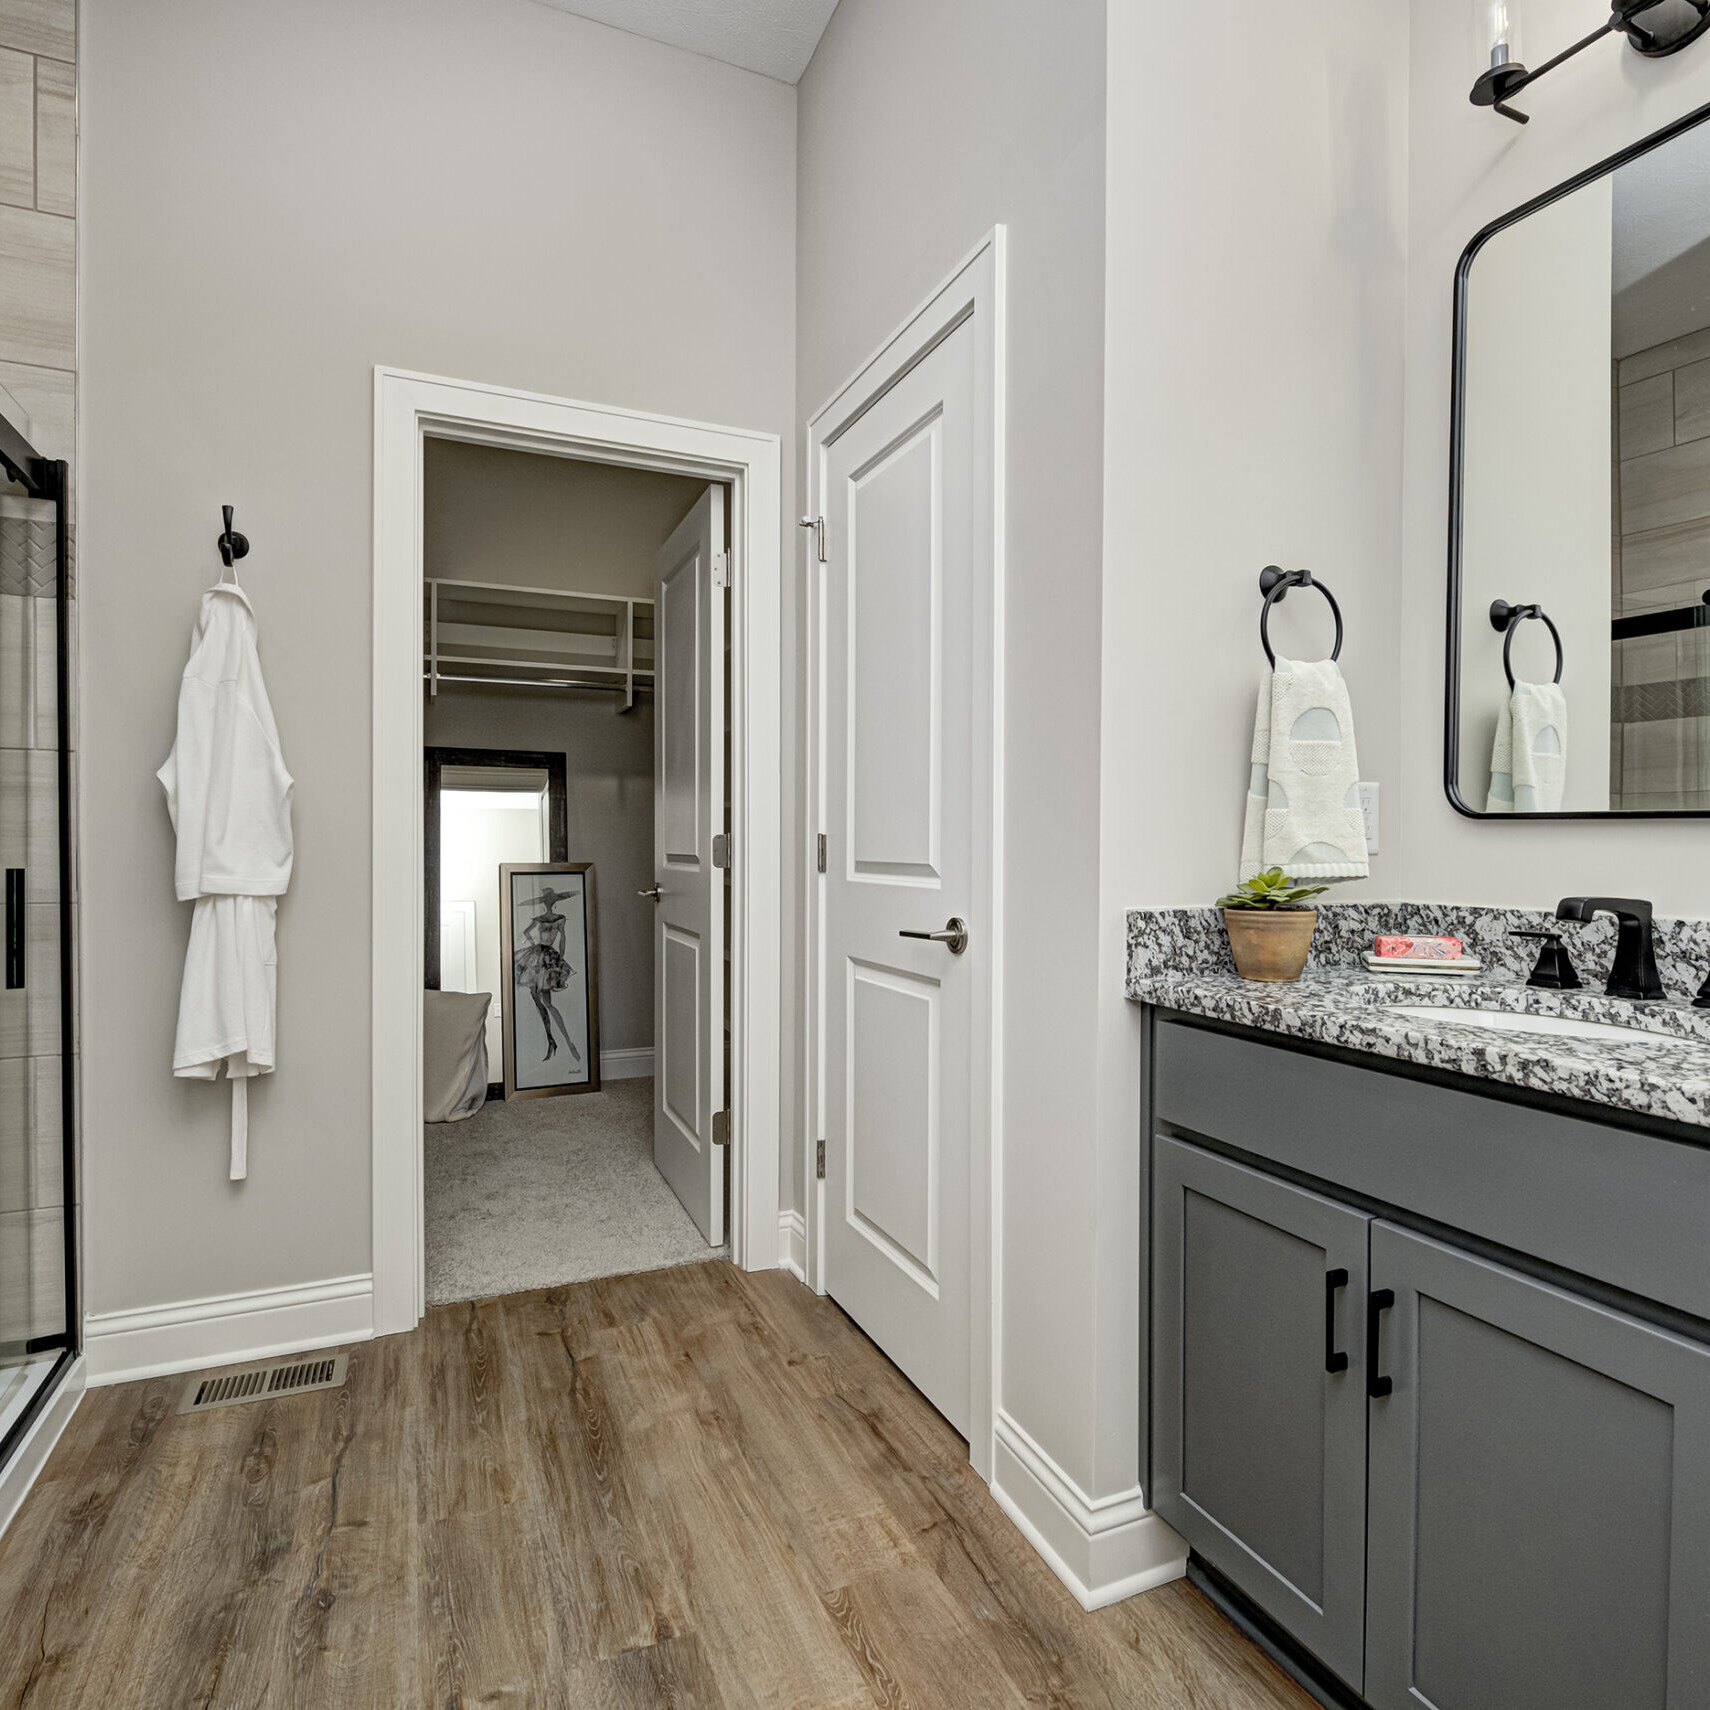 A bathroom with custom gray cabinets and a spacious walk-in shower.